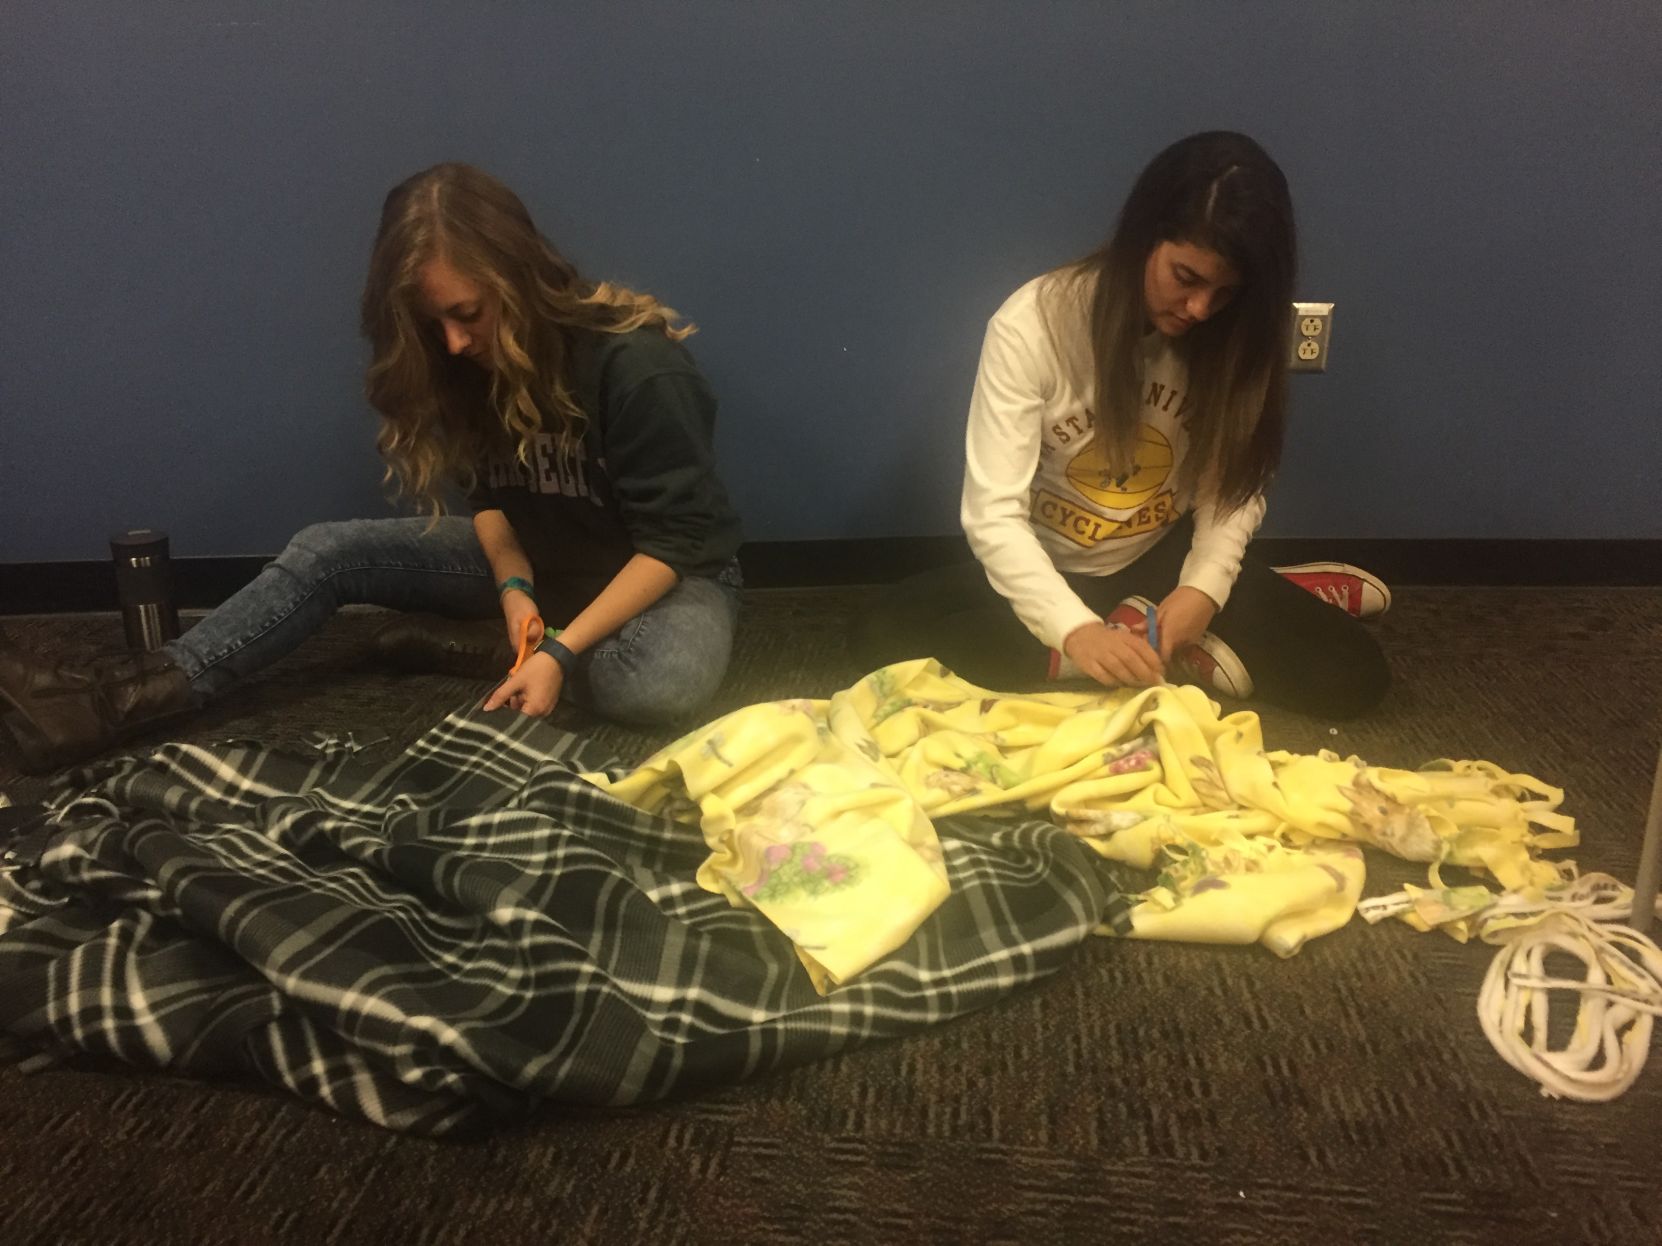 Two students sewing on a cloth.